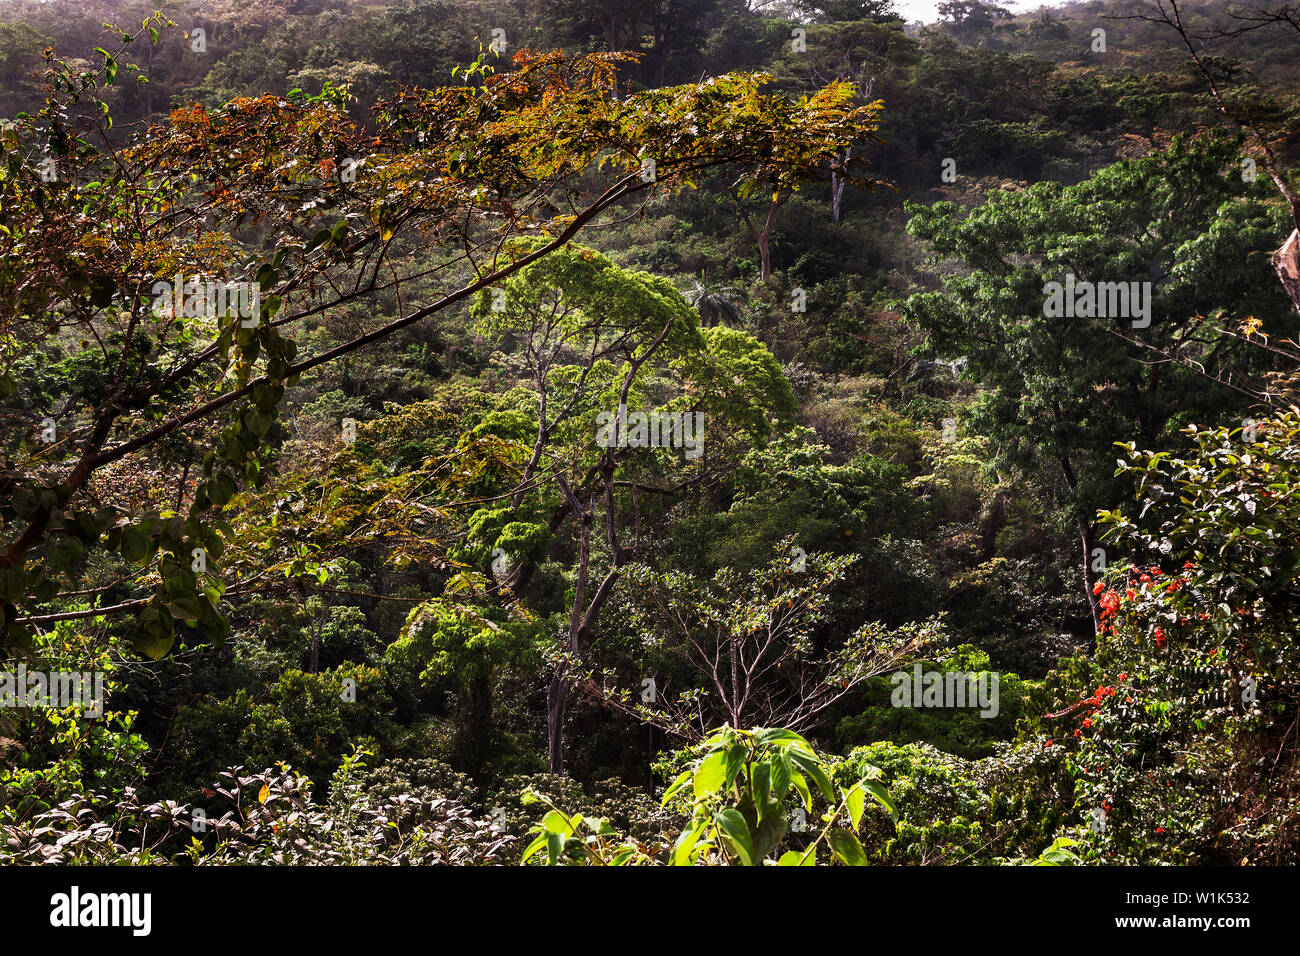 Landscape tropical rainforest lush vegetation with plants & some flowering trees in African jungle of forest reserve conservation area, Sierra Leone Stock Photo